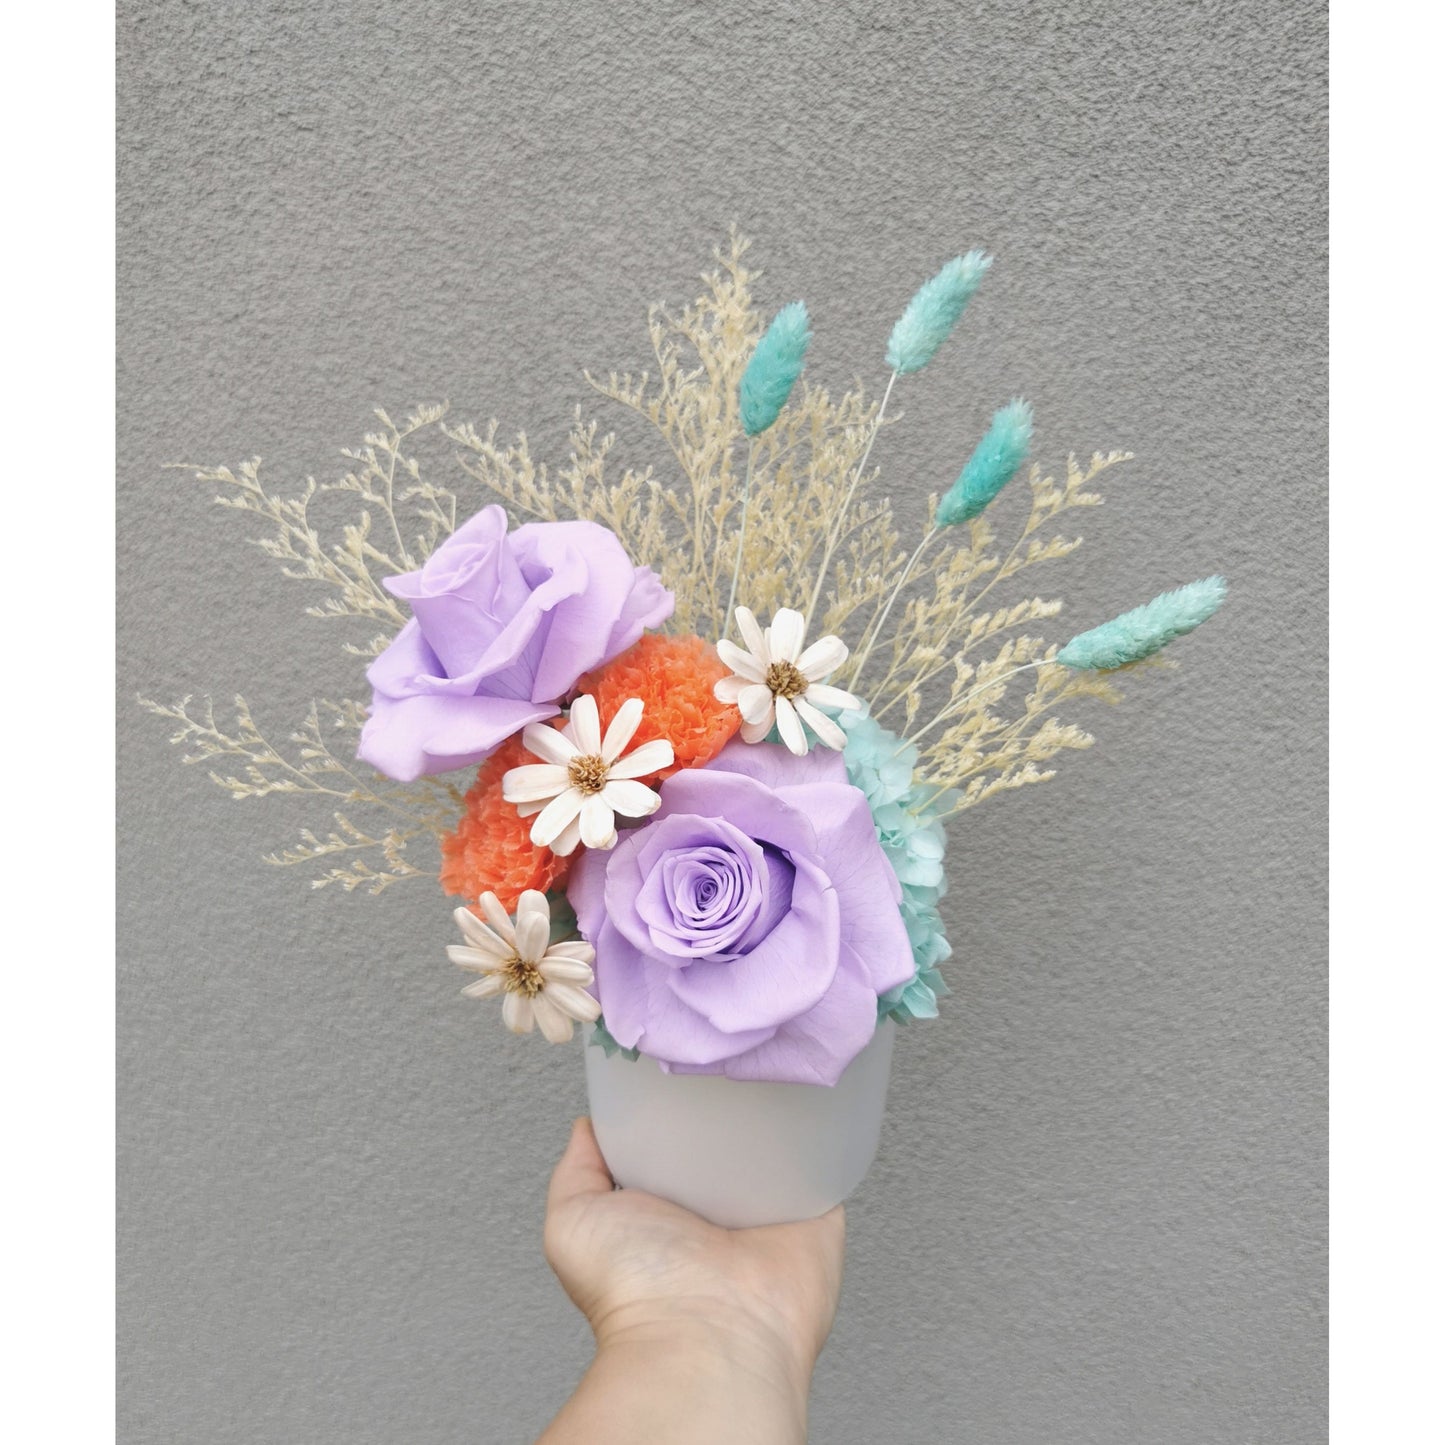 Dried & Preserved flower arrangement in purple, orange, white, blue & yellow. Featuring purple preserved roses and orange preserved carnations. Flowers are set in to a white pot. Photo shows arrangement being held by hand against a blank wall